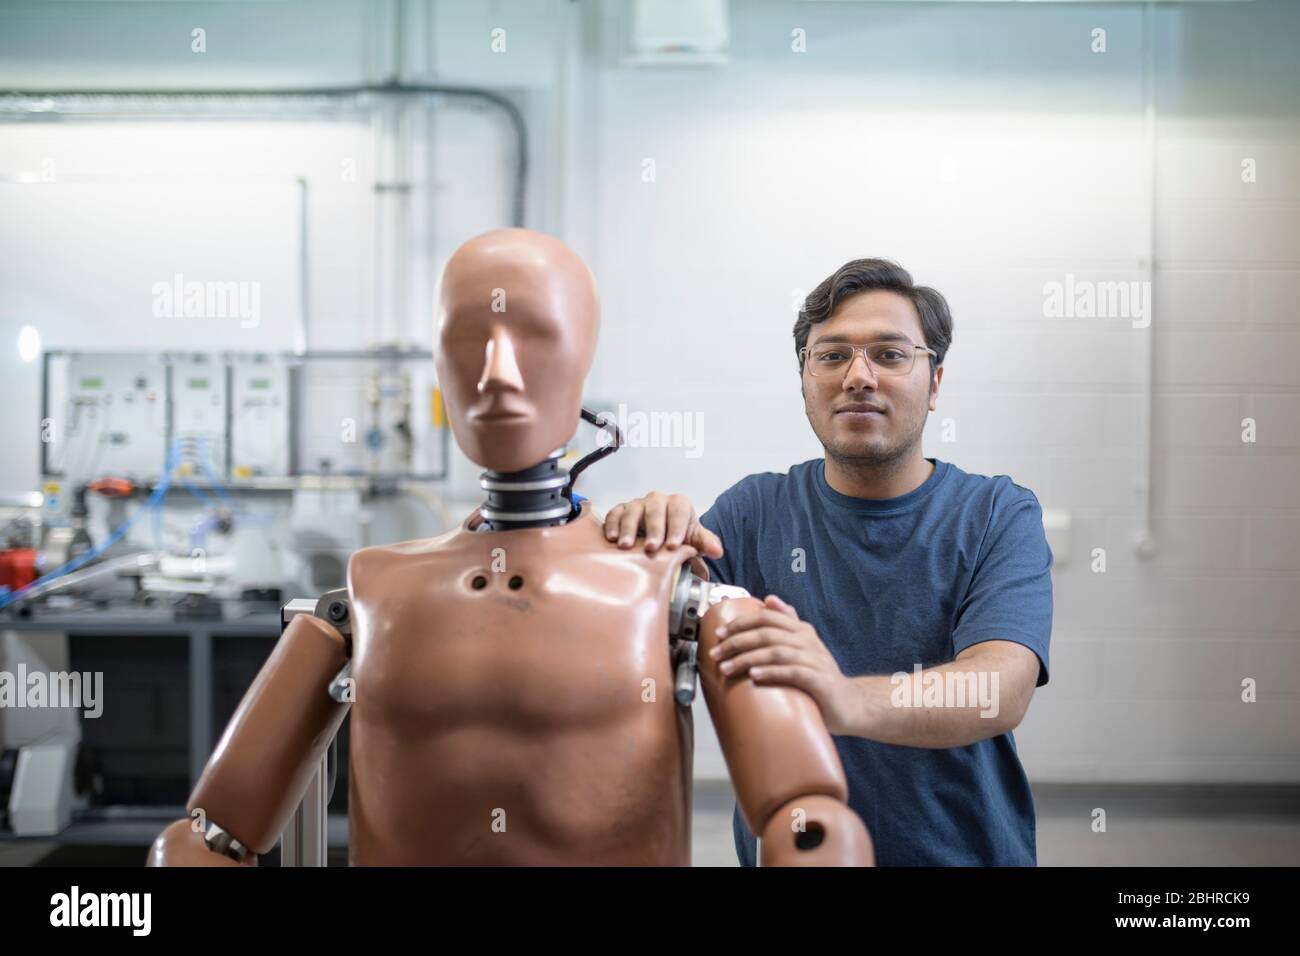 A male student standing behind a test dummy in a workshop. Stock Photo